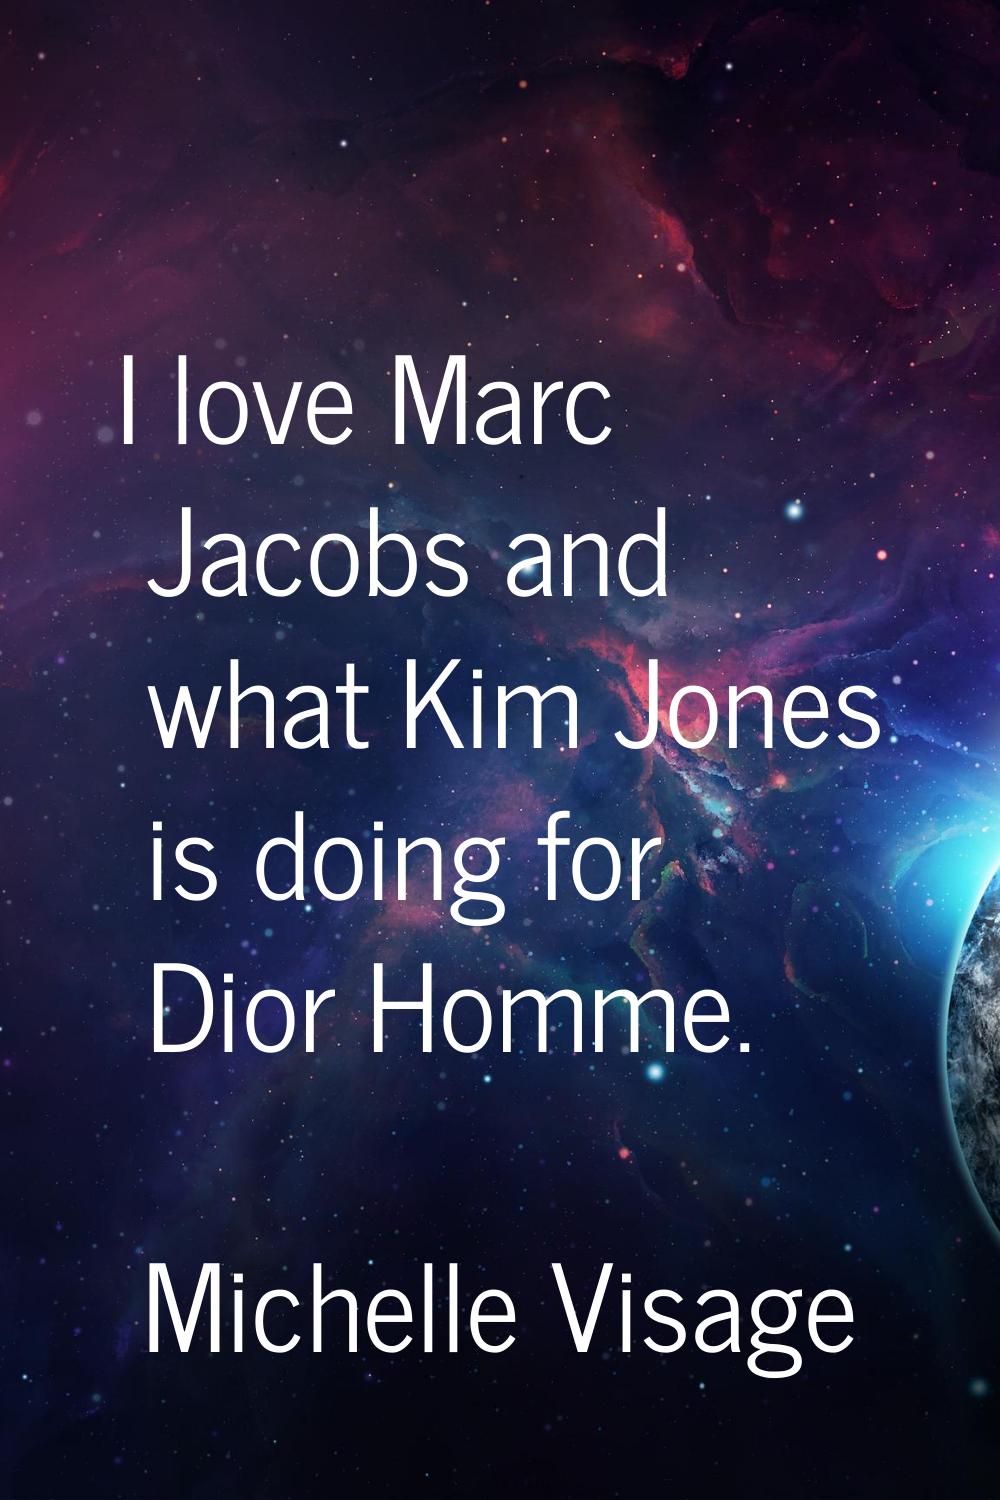 I love Marc Jacobs and what Kim Jones is doing for Dior Homme.